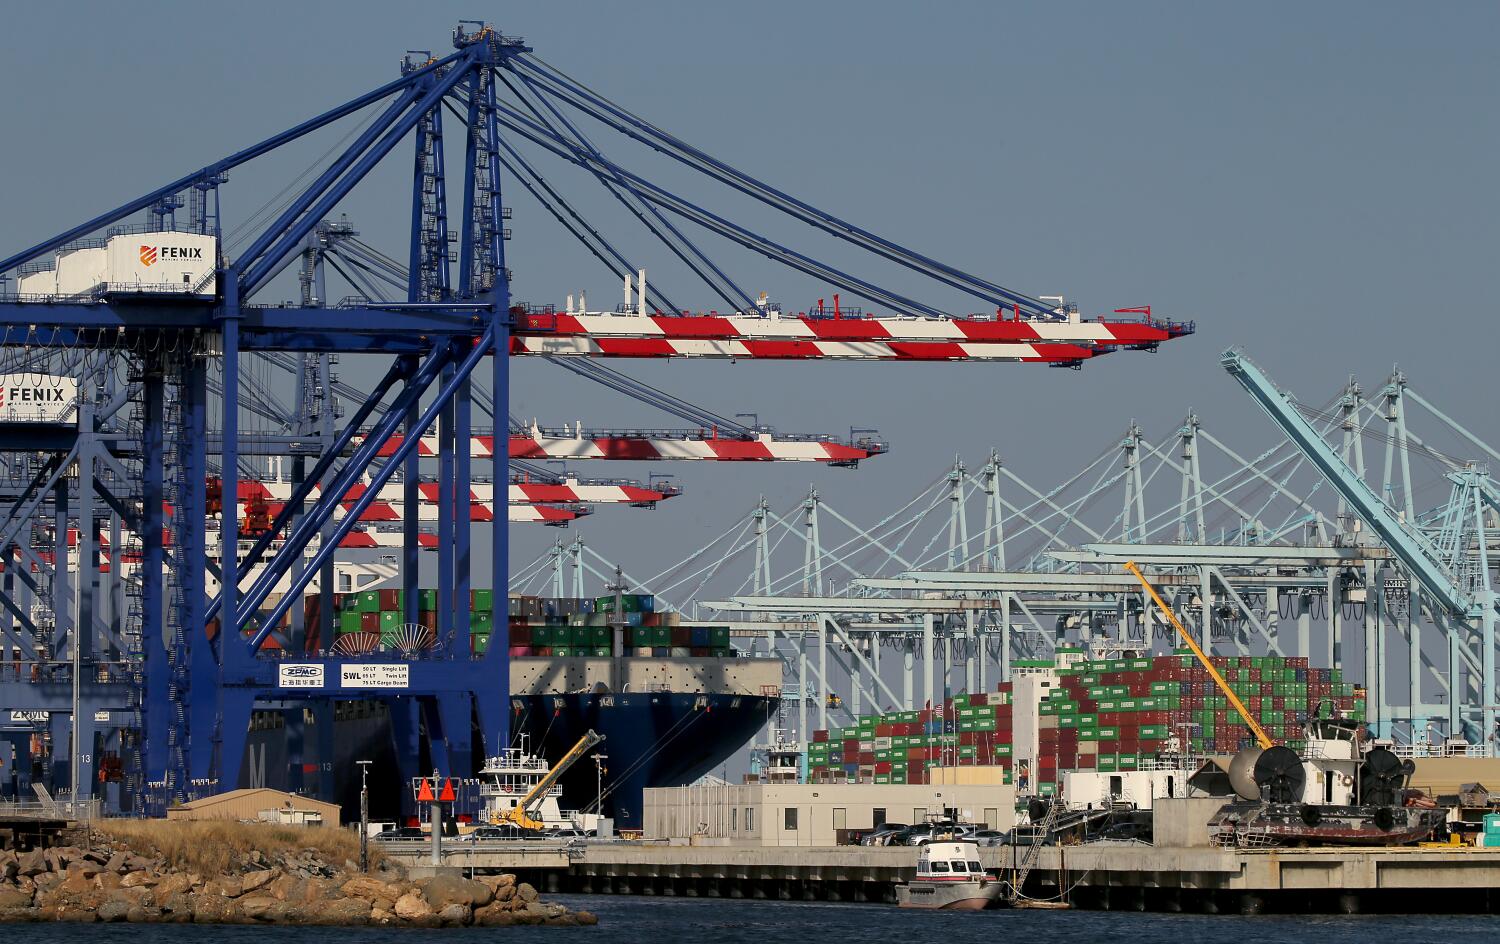 How a fight over two jobs pushed the dockworker union into bankruptcy